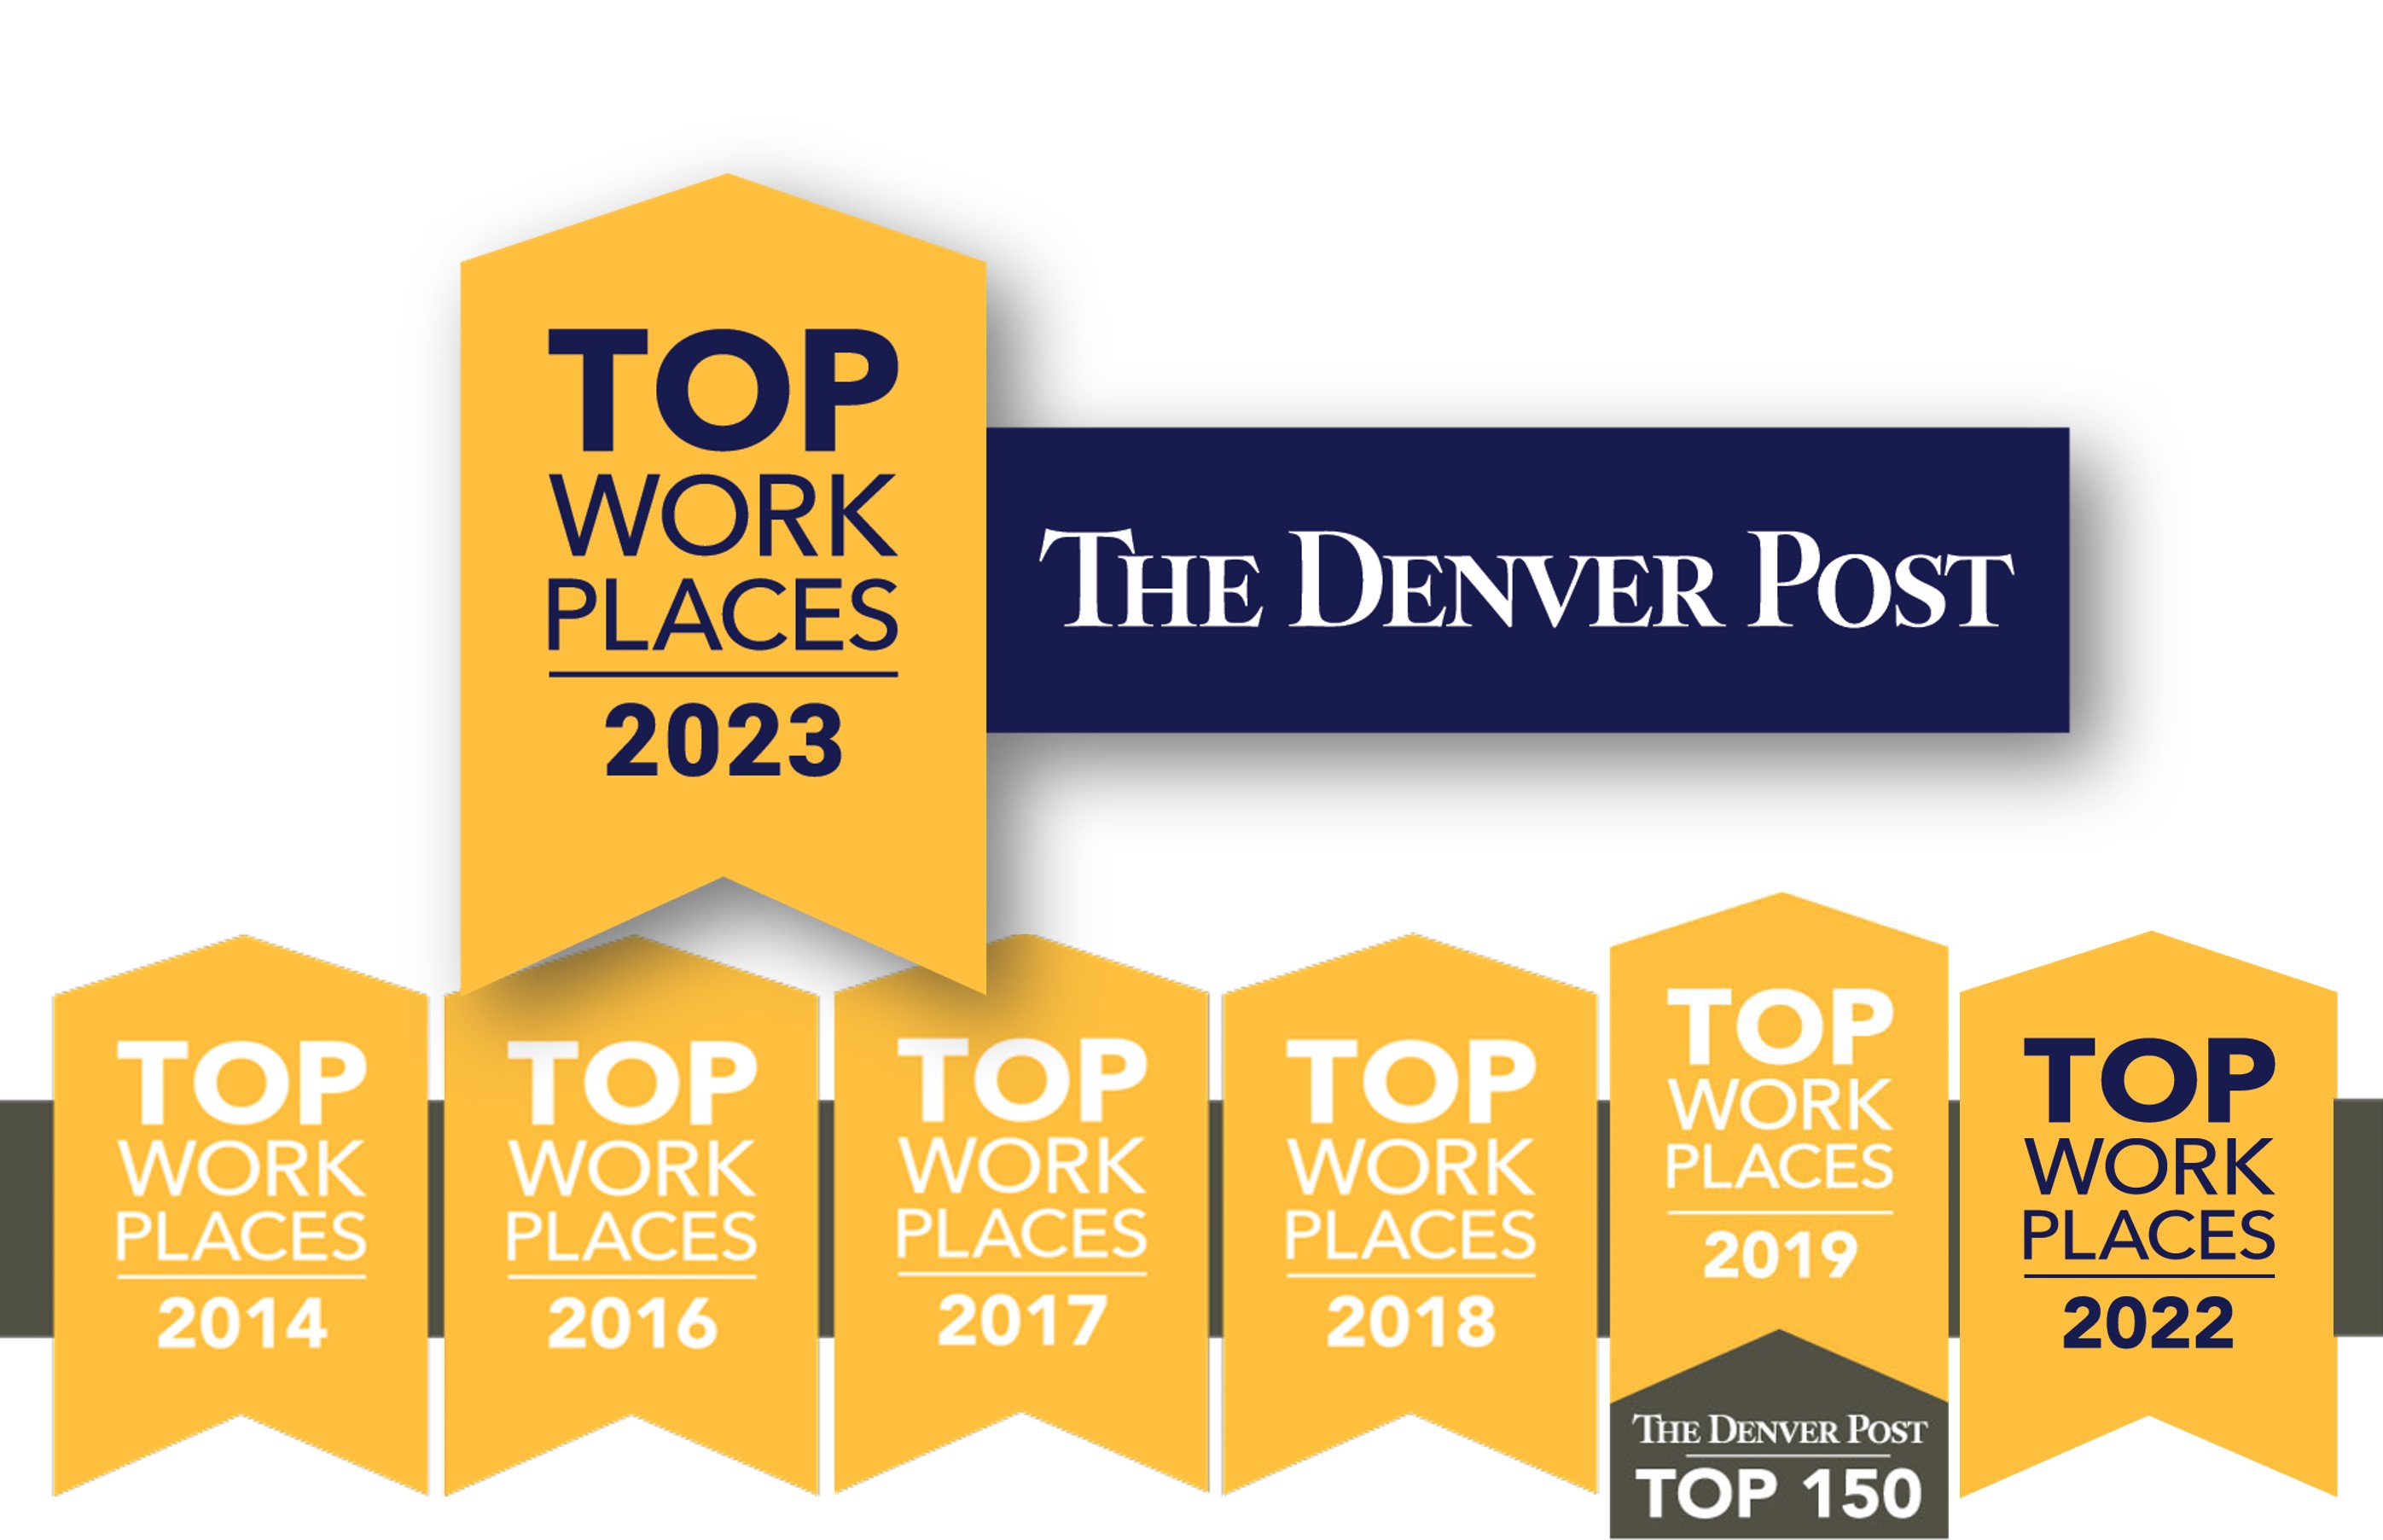 The Denver Post Top Work Places